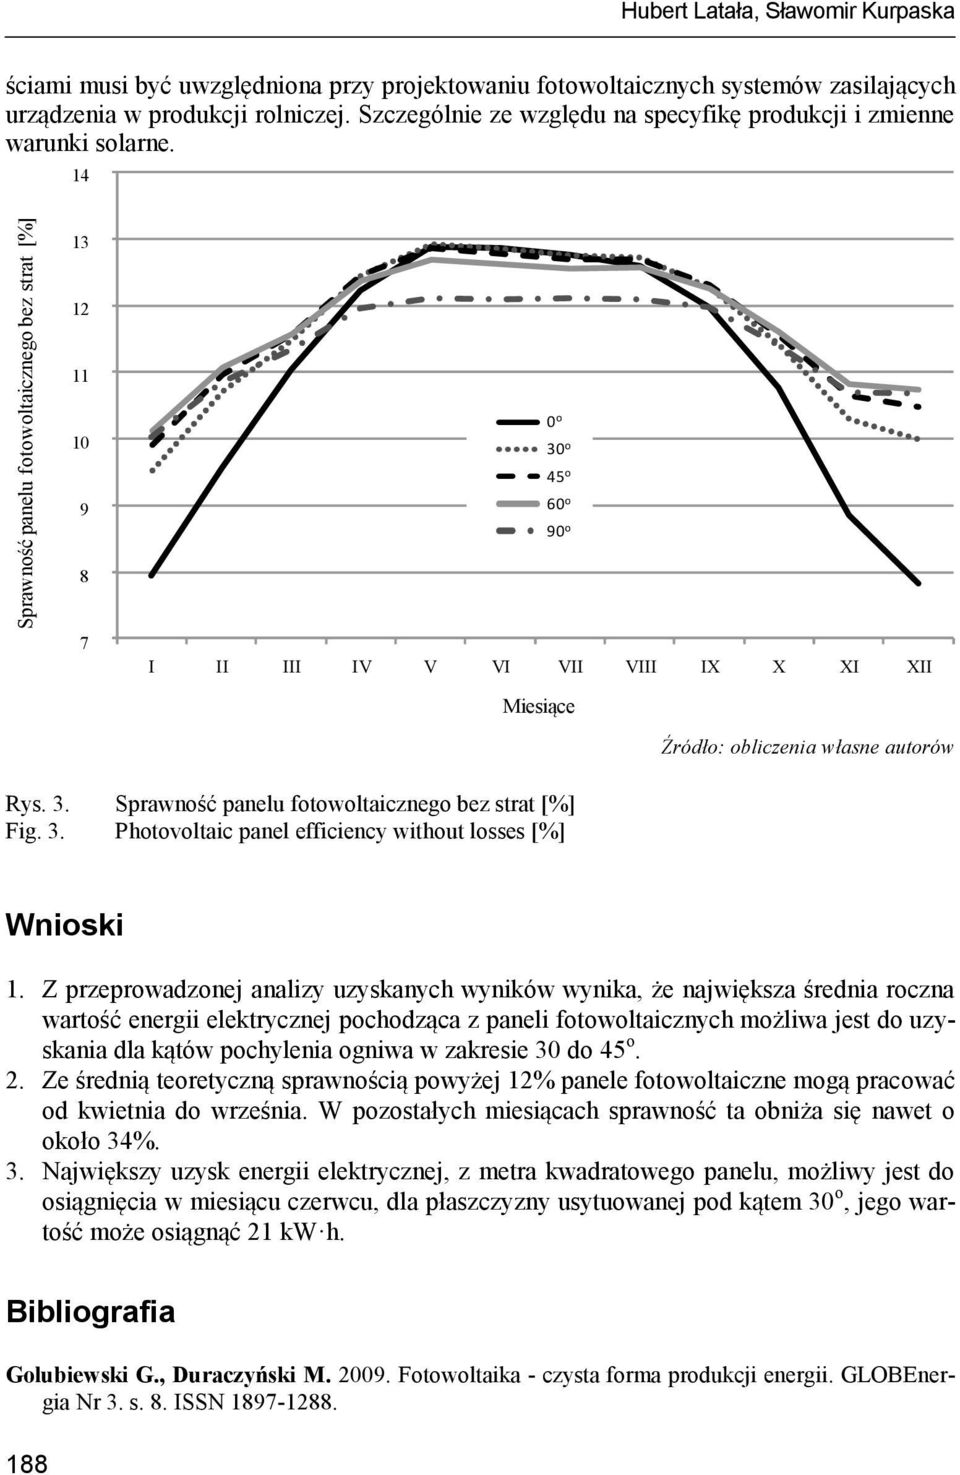 3. Photovoltaic panel efficiency without losses [%] Wnioski 1.